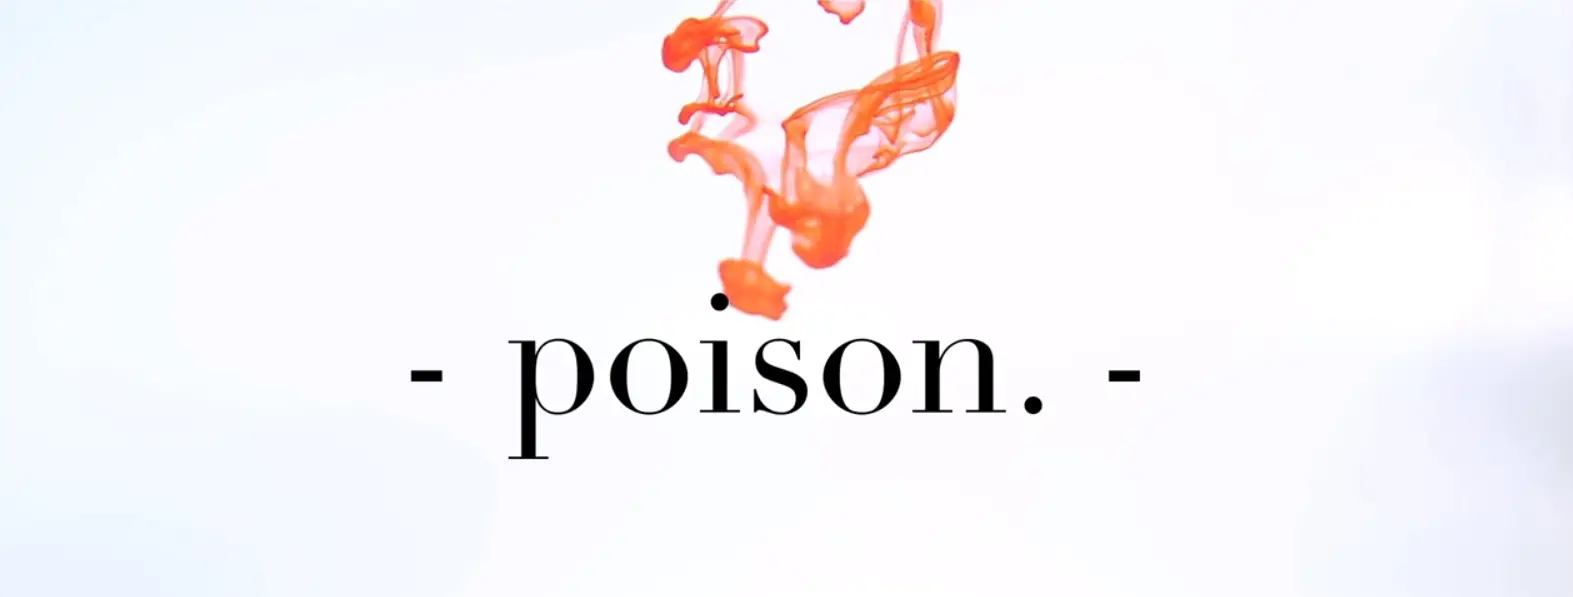 "Poison" by luhx.